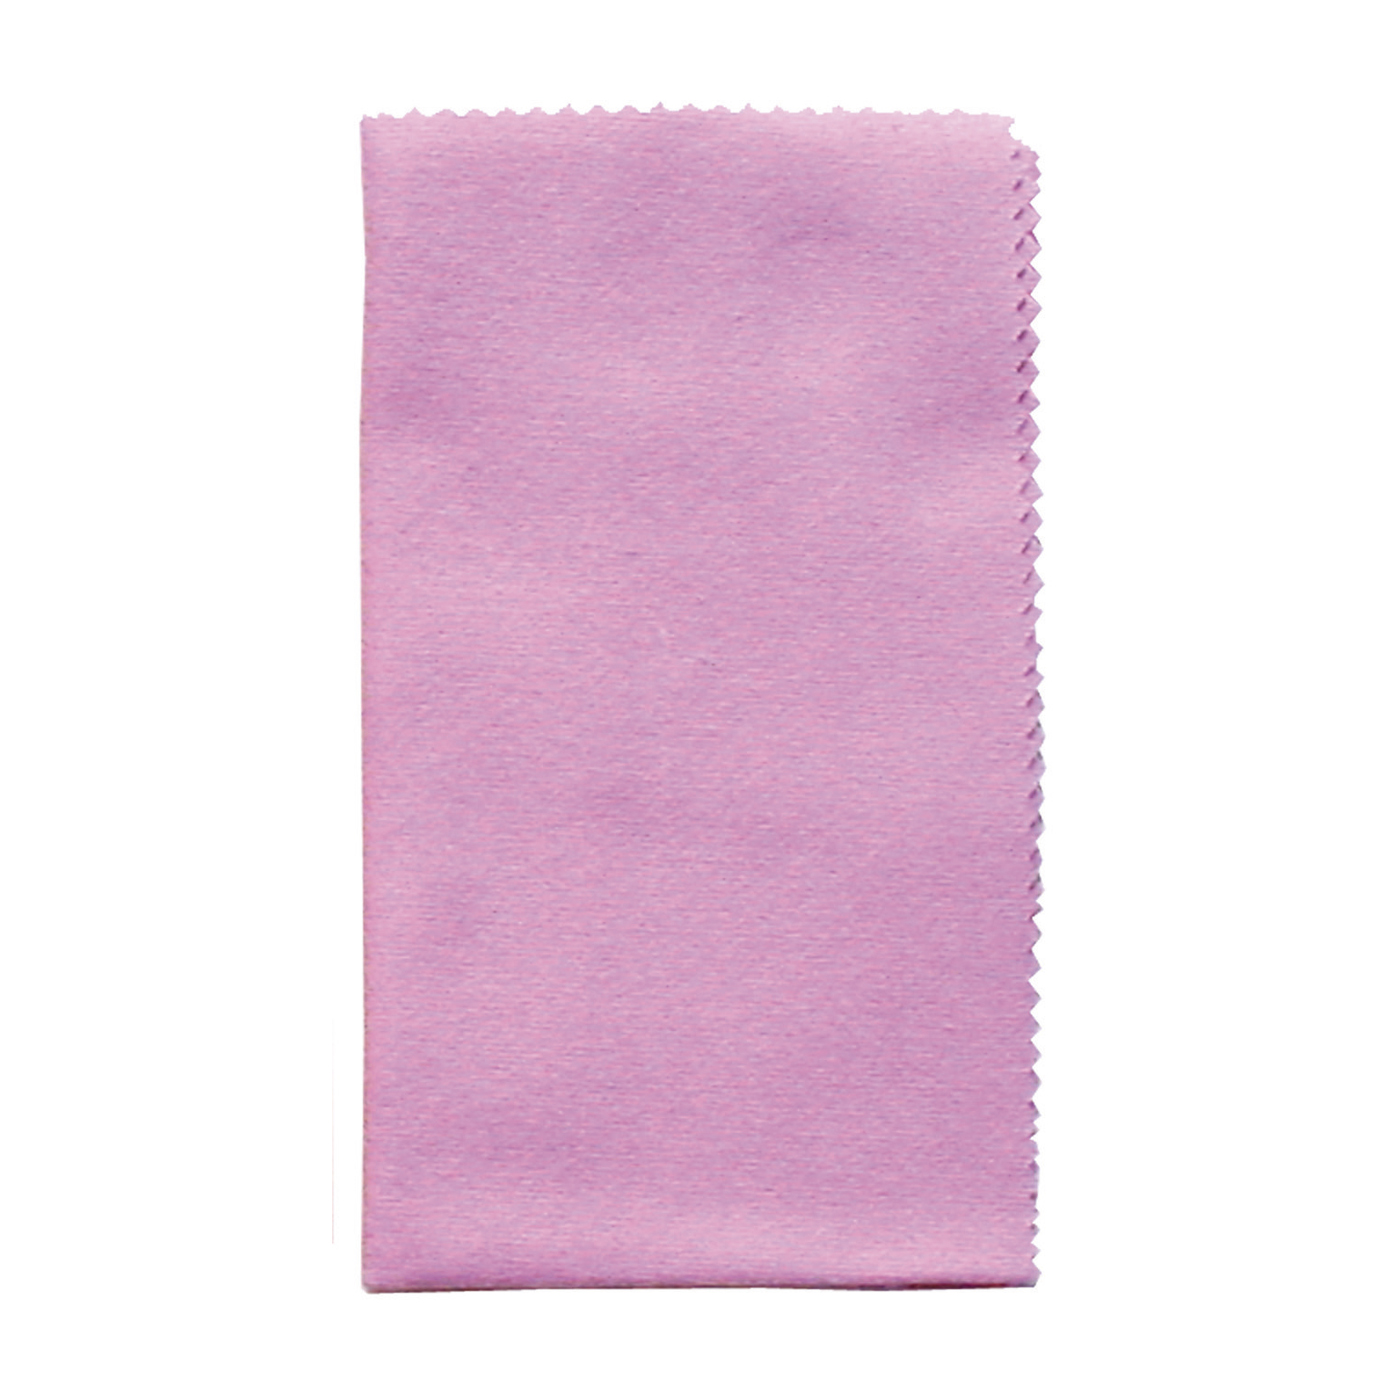 Care Cloth for Pearl Jewellery, Antique Pink, 300 x 240 mm - 1 piece